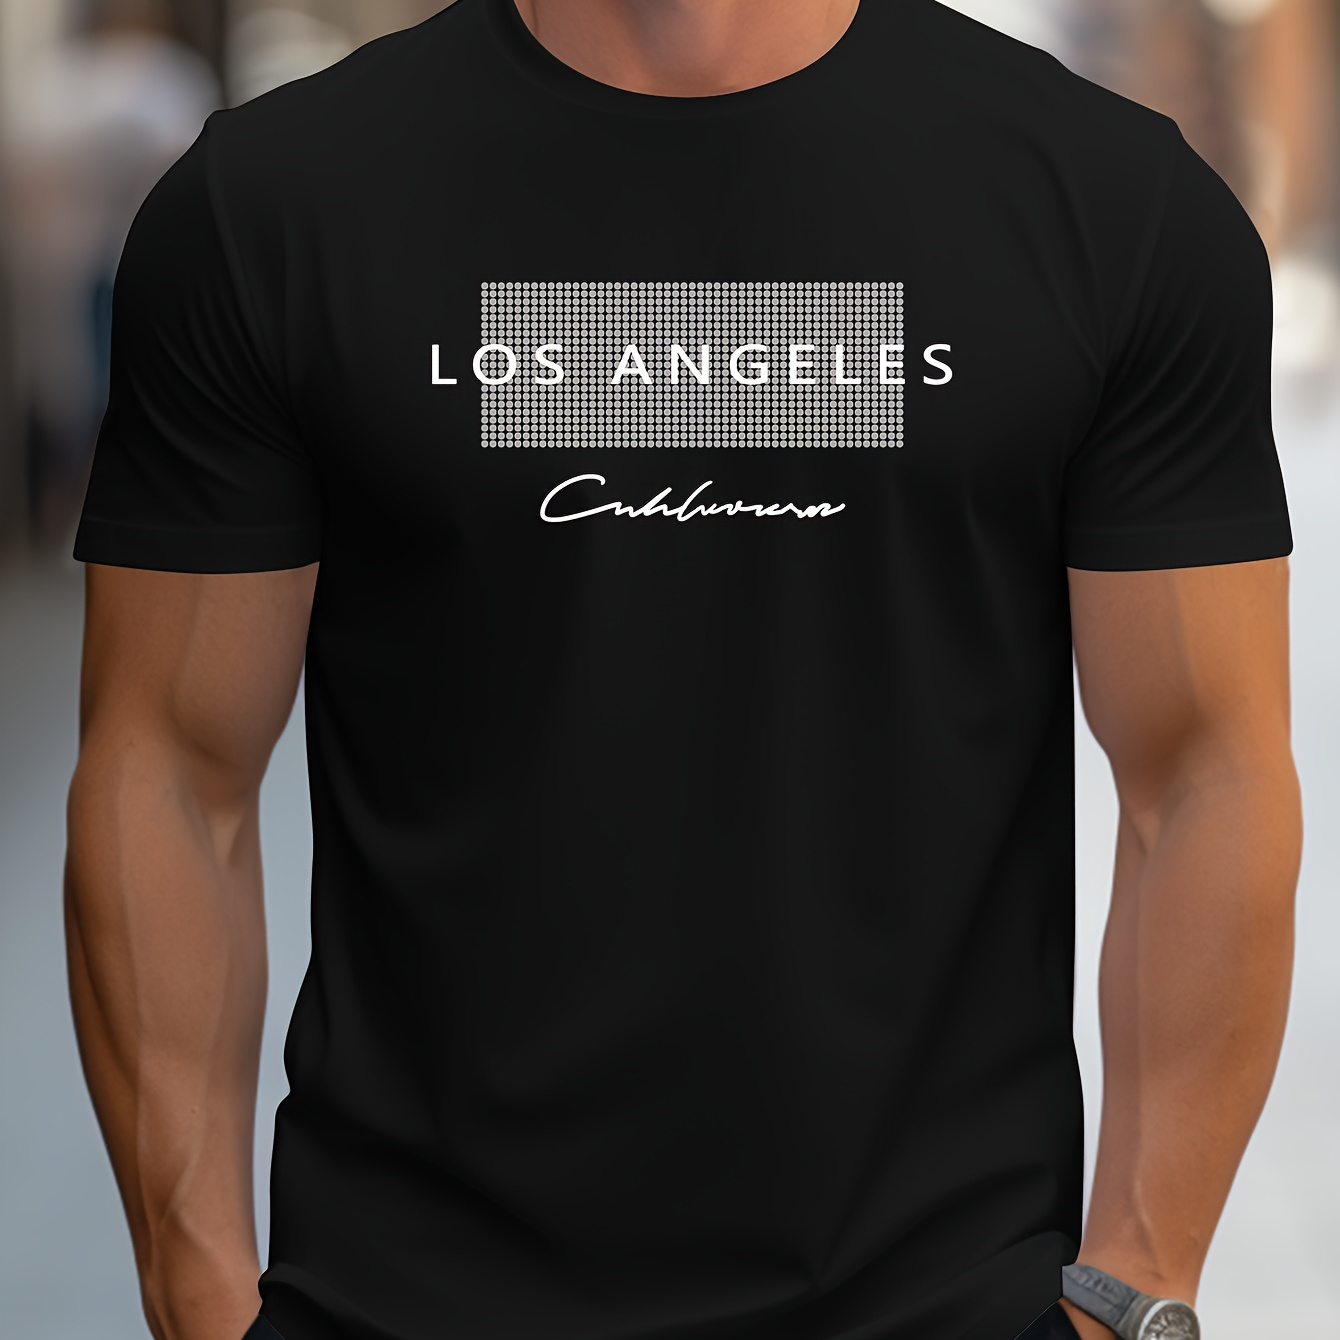 

Los Angeles Graphic Print Men's Creative Top, Casual Short Sleeve Crew Neck T-shirt, Men's Clothing For Summer Outdoor